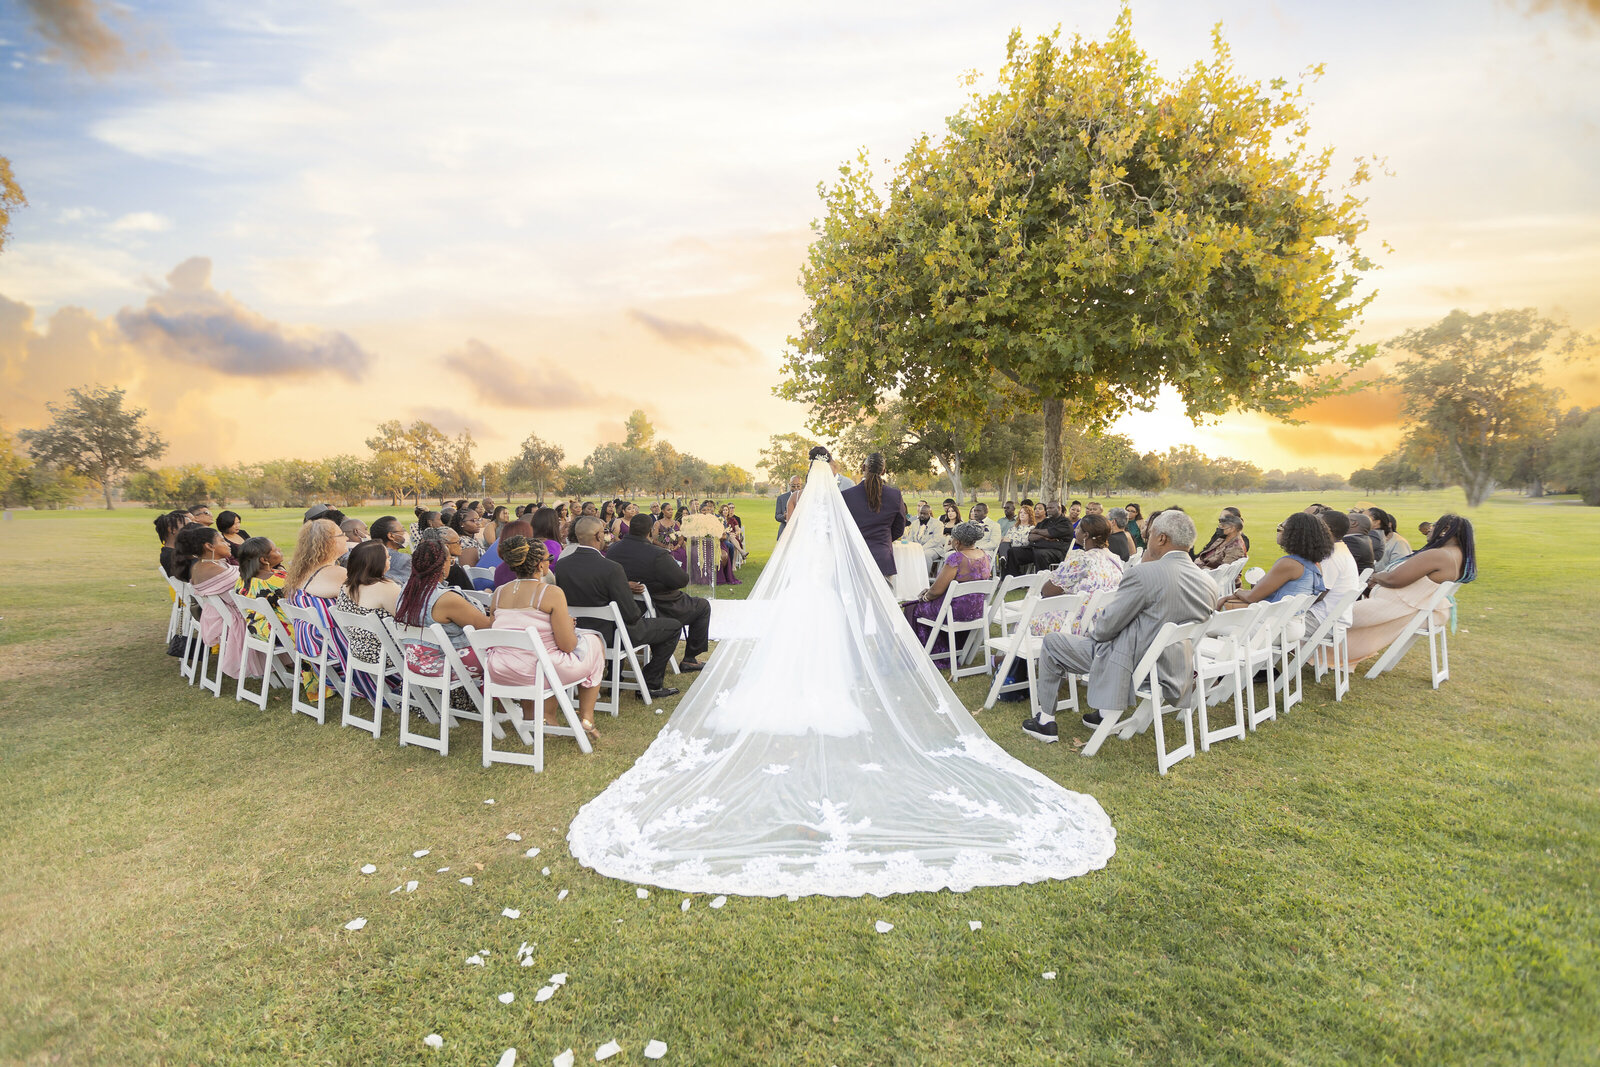 Bride walks down the aisle with guests looking on and her veil trailing behind dramatically in the Sacramento CA wedding  photograph.